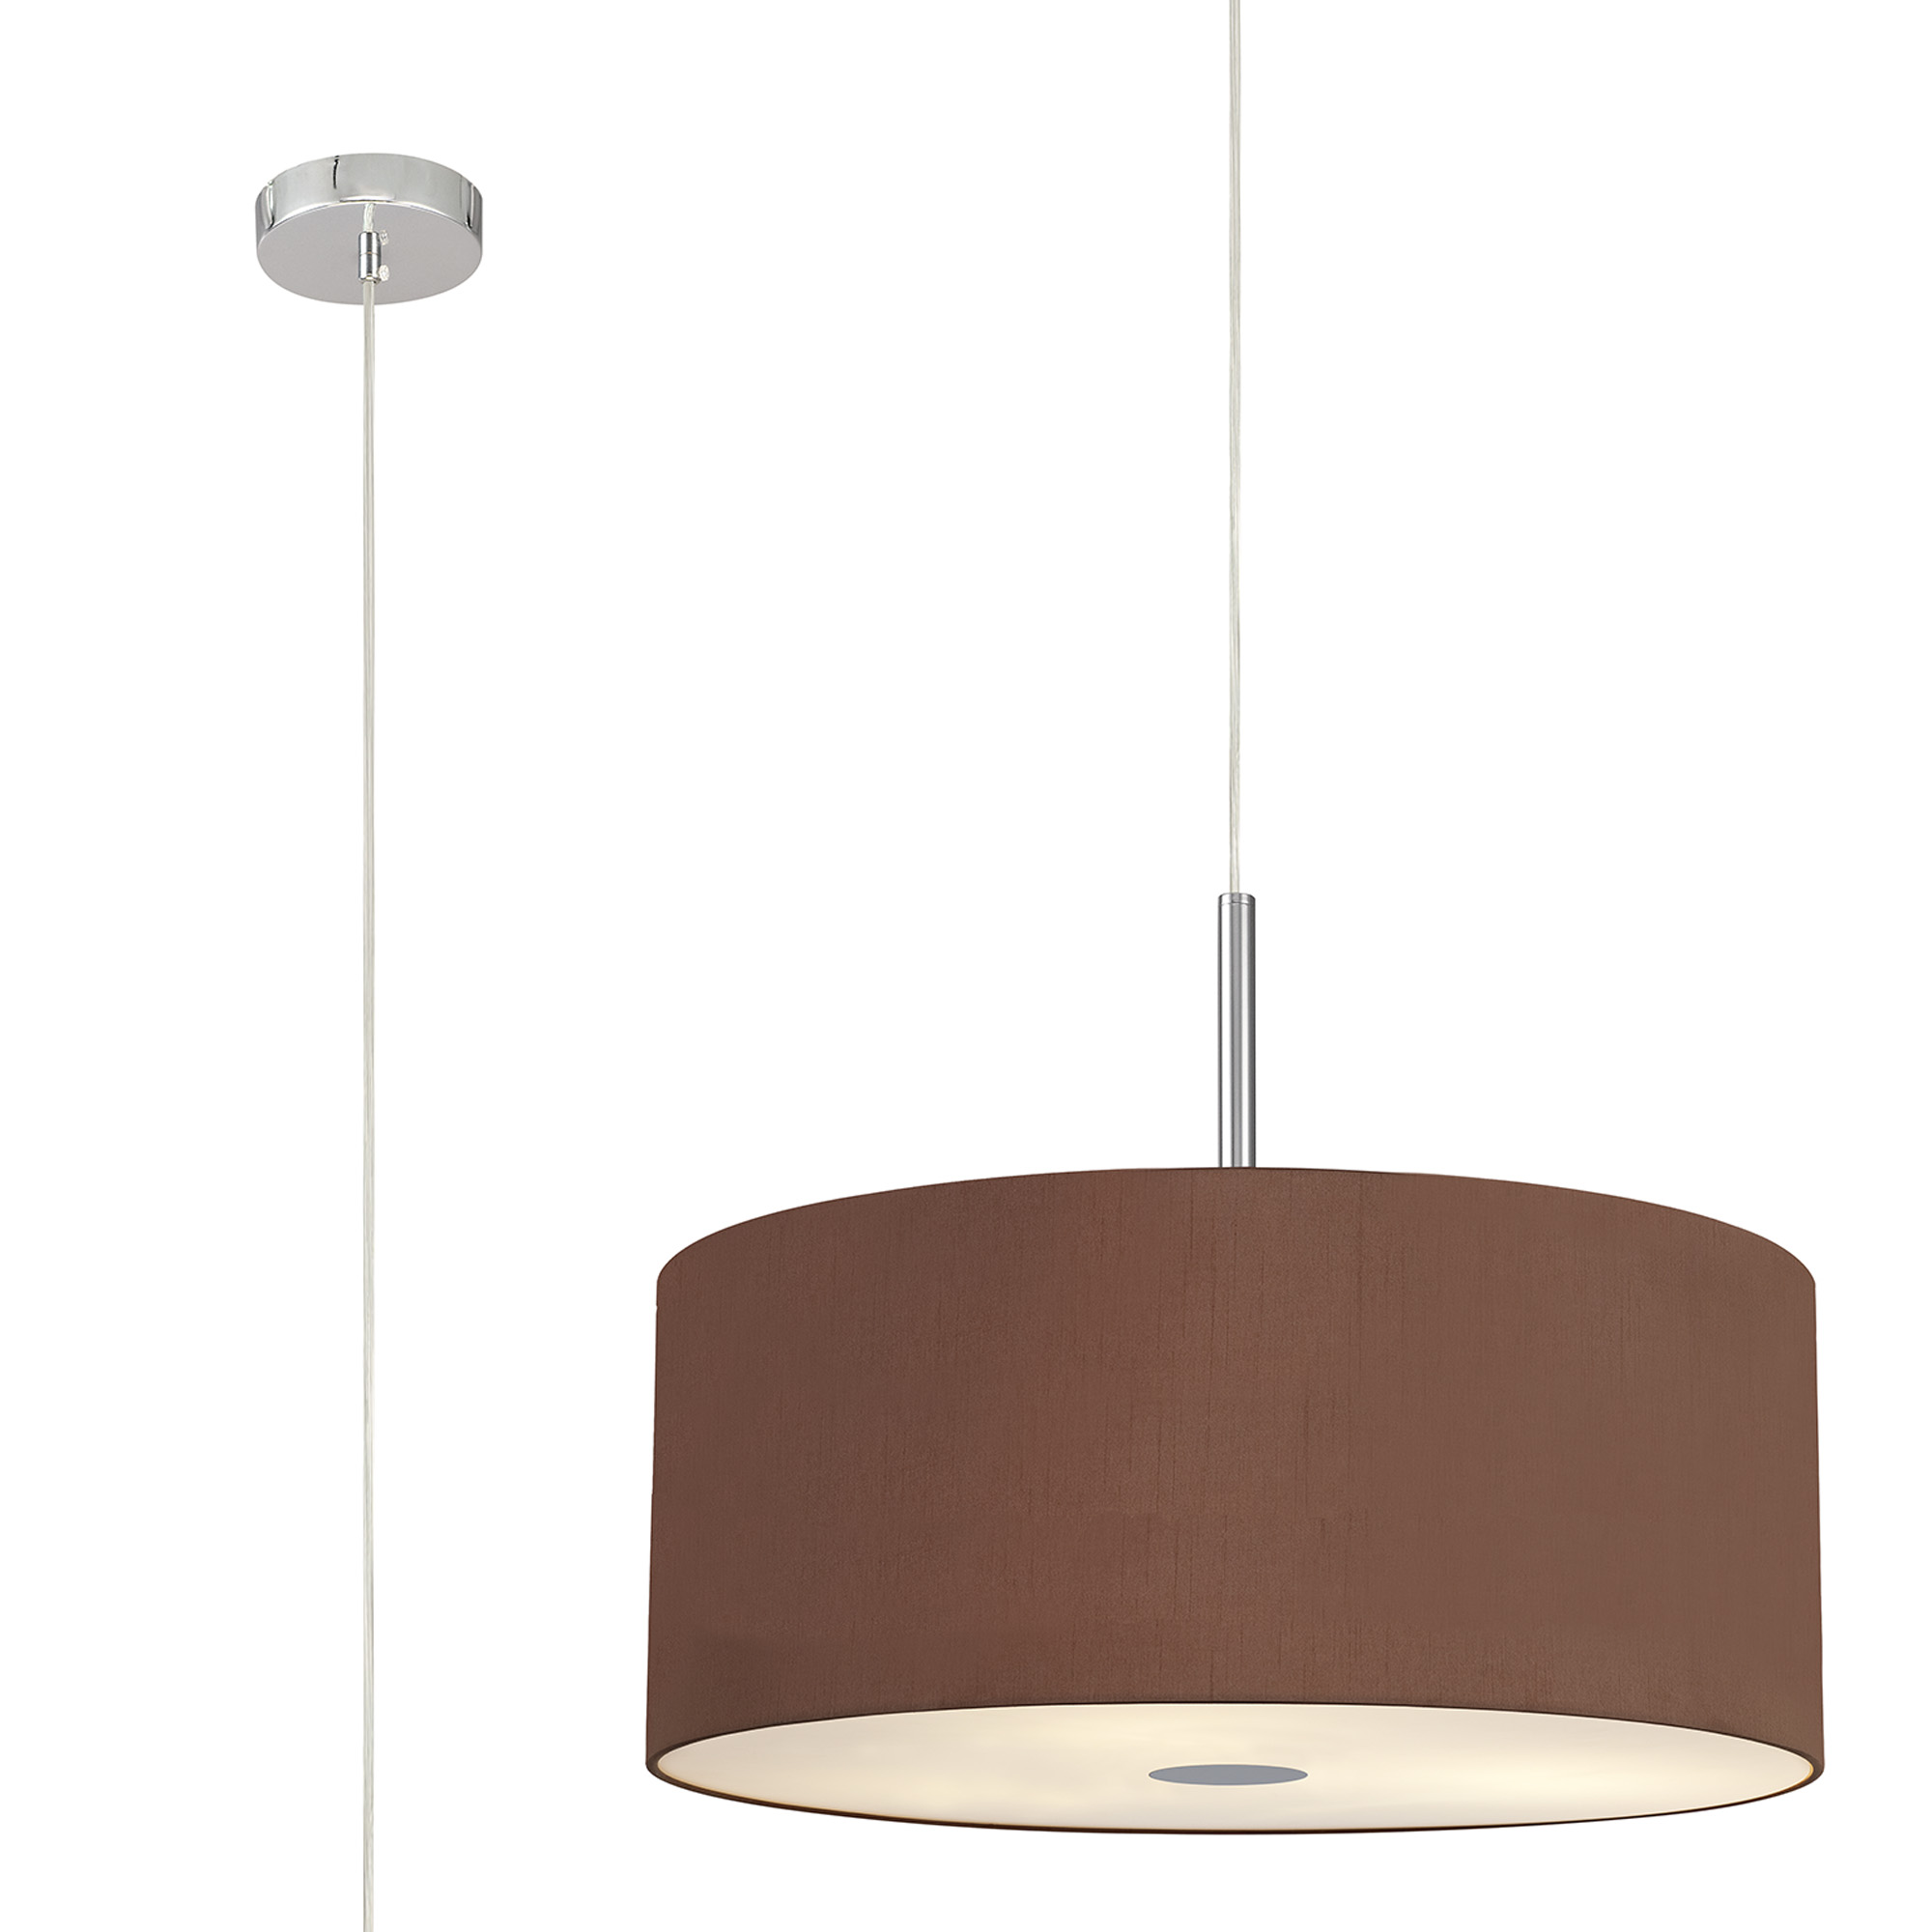 DK0478  Baymont 60cm 5 Light Pendant Polished Chrome, Raw Cocoa/Grecian Bronze, Frosted Diffuser